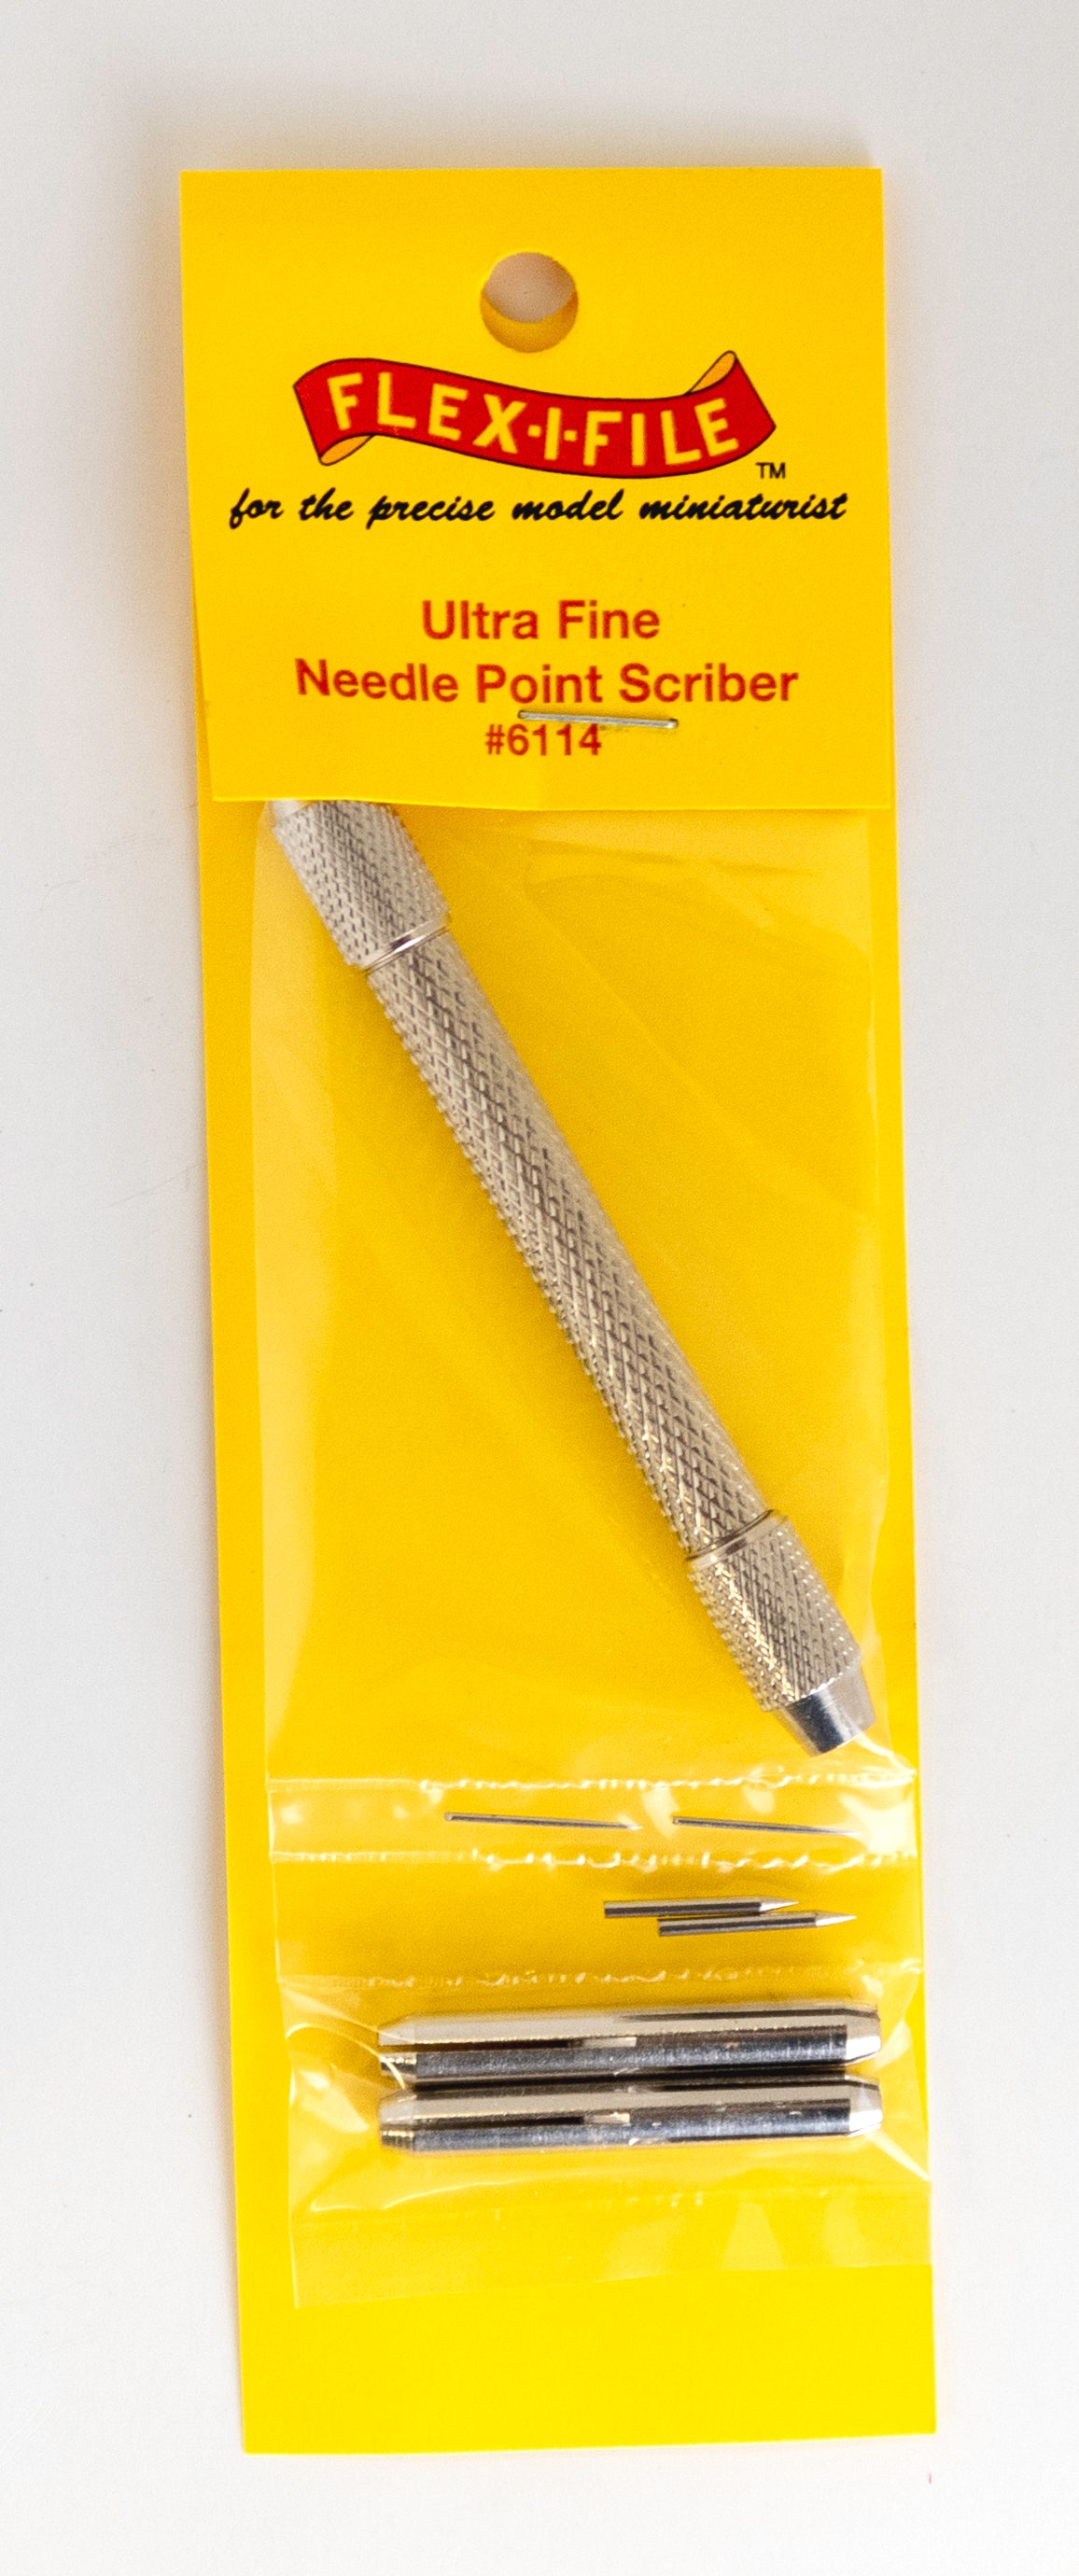 Needle Point Scriber & Scribe-N-Cut Knife